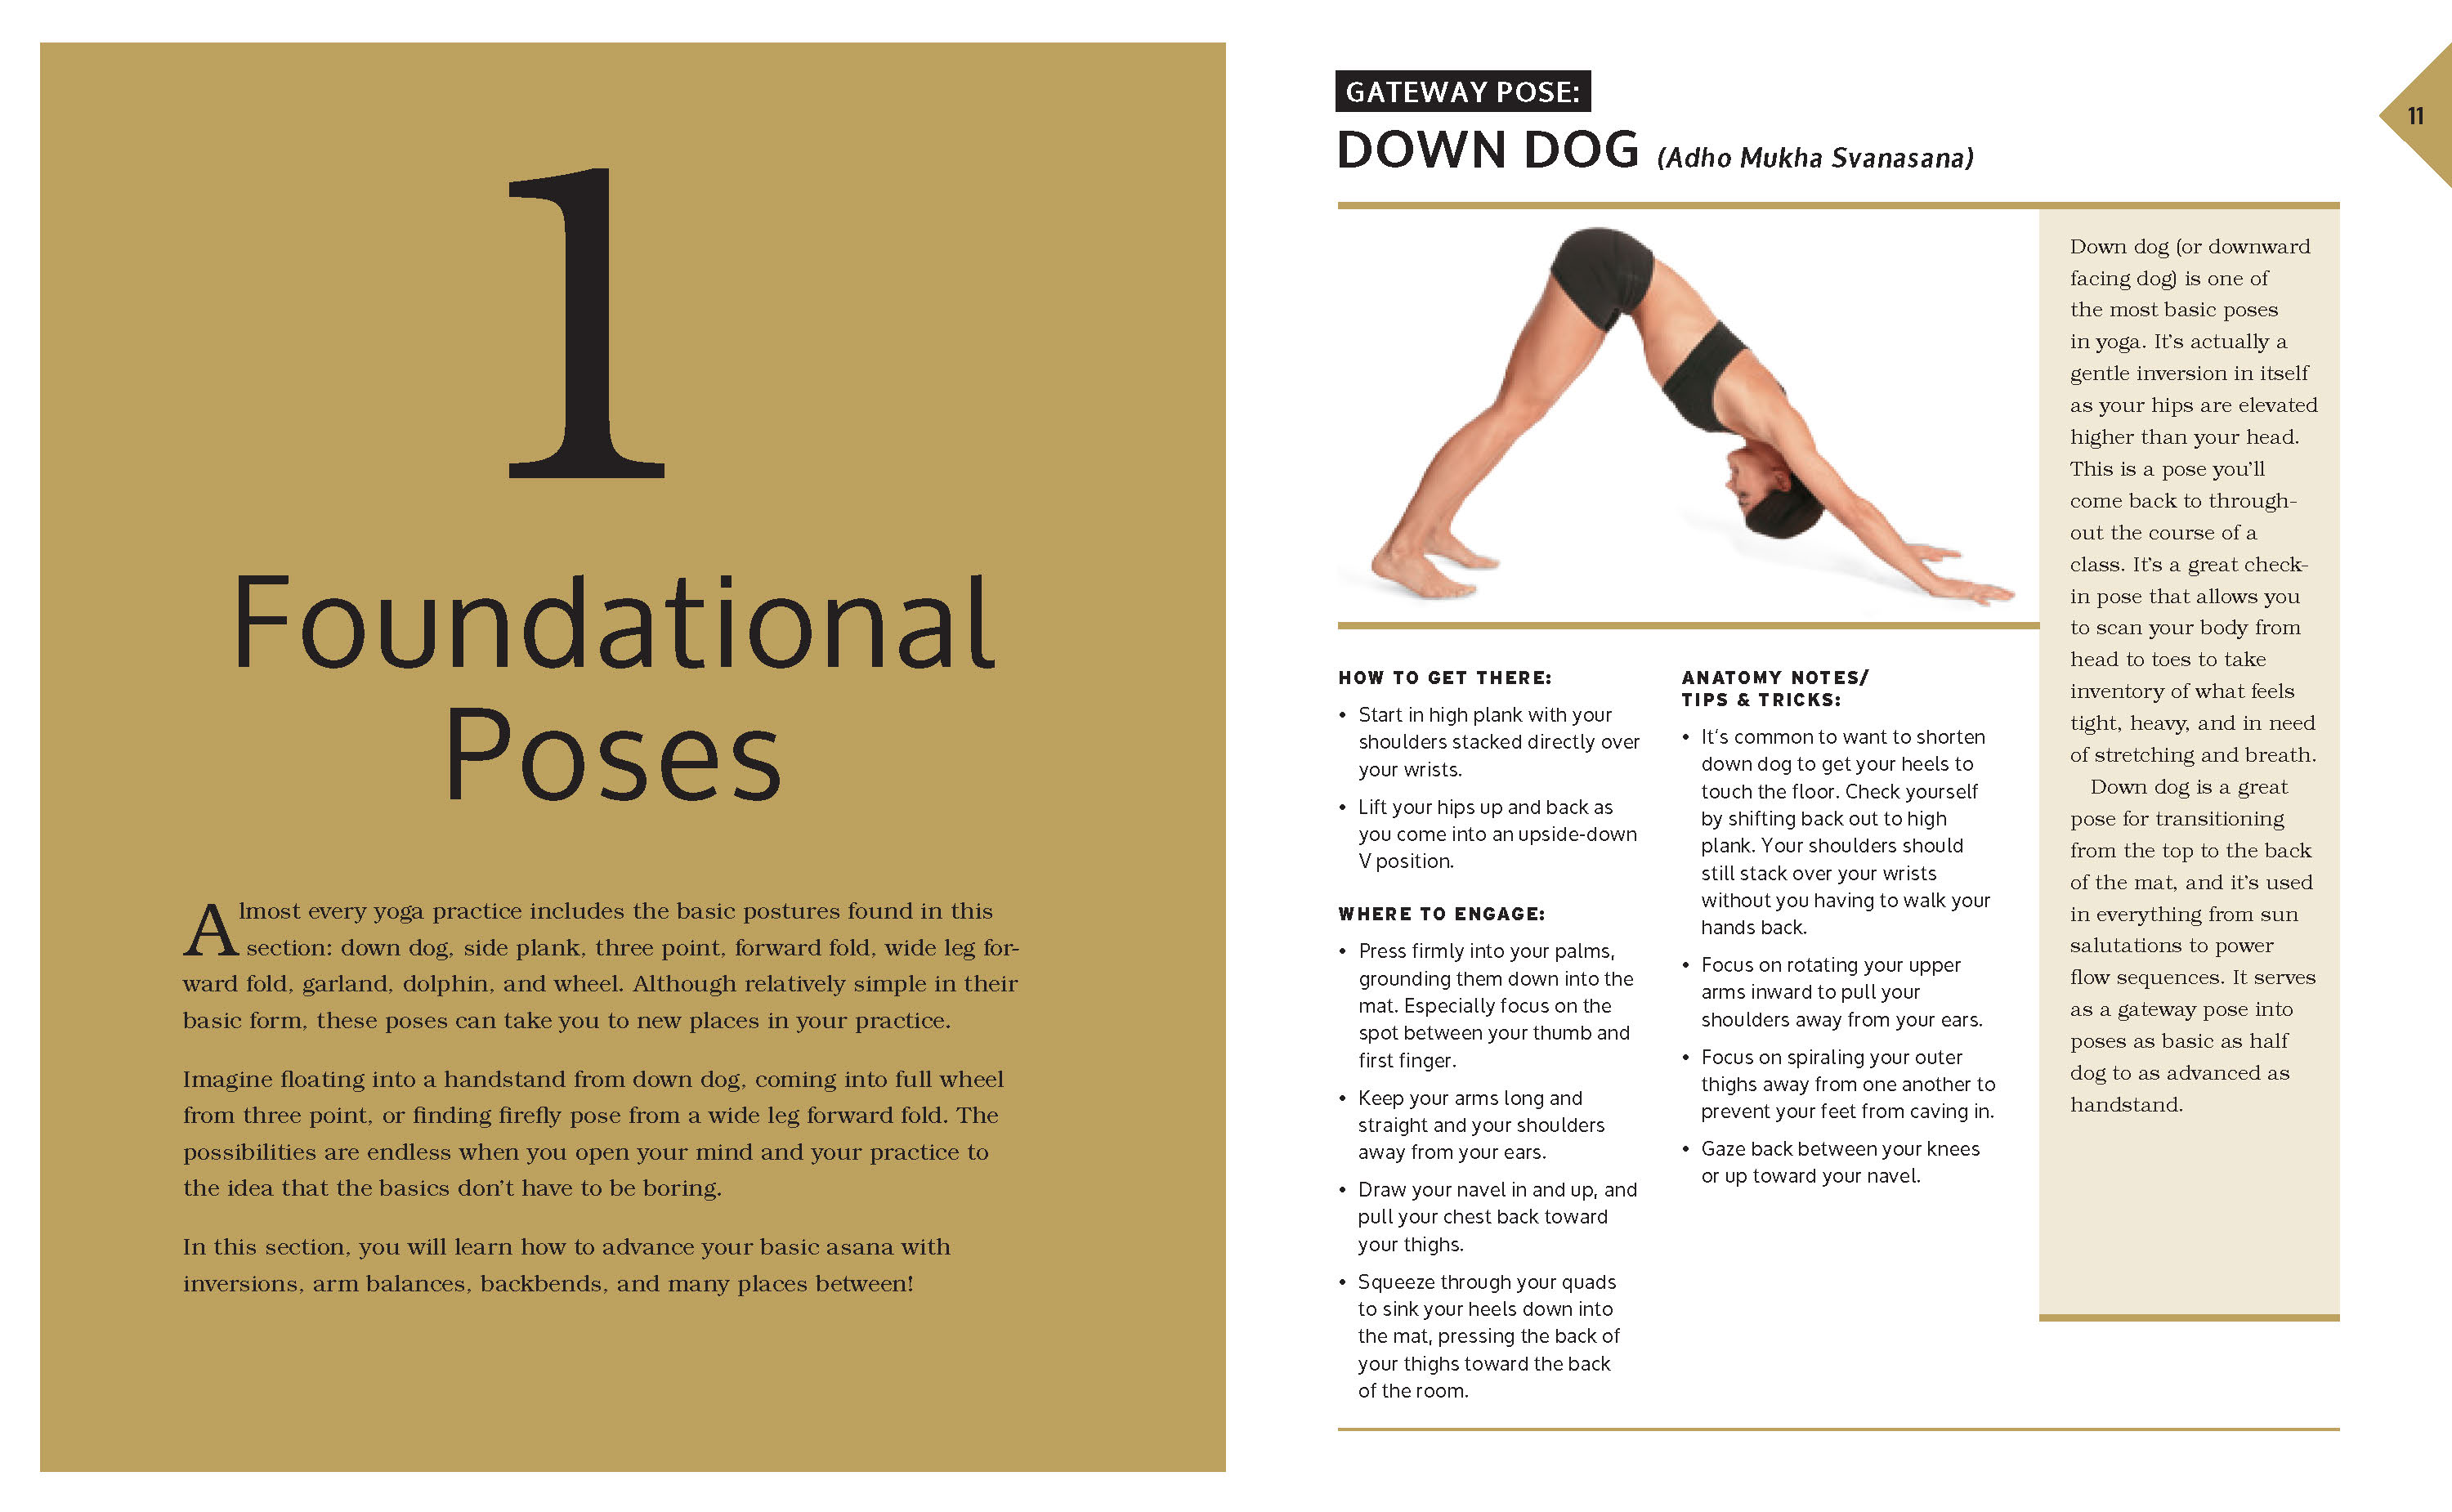 The Complete Book of Yoga Inversions